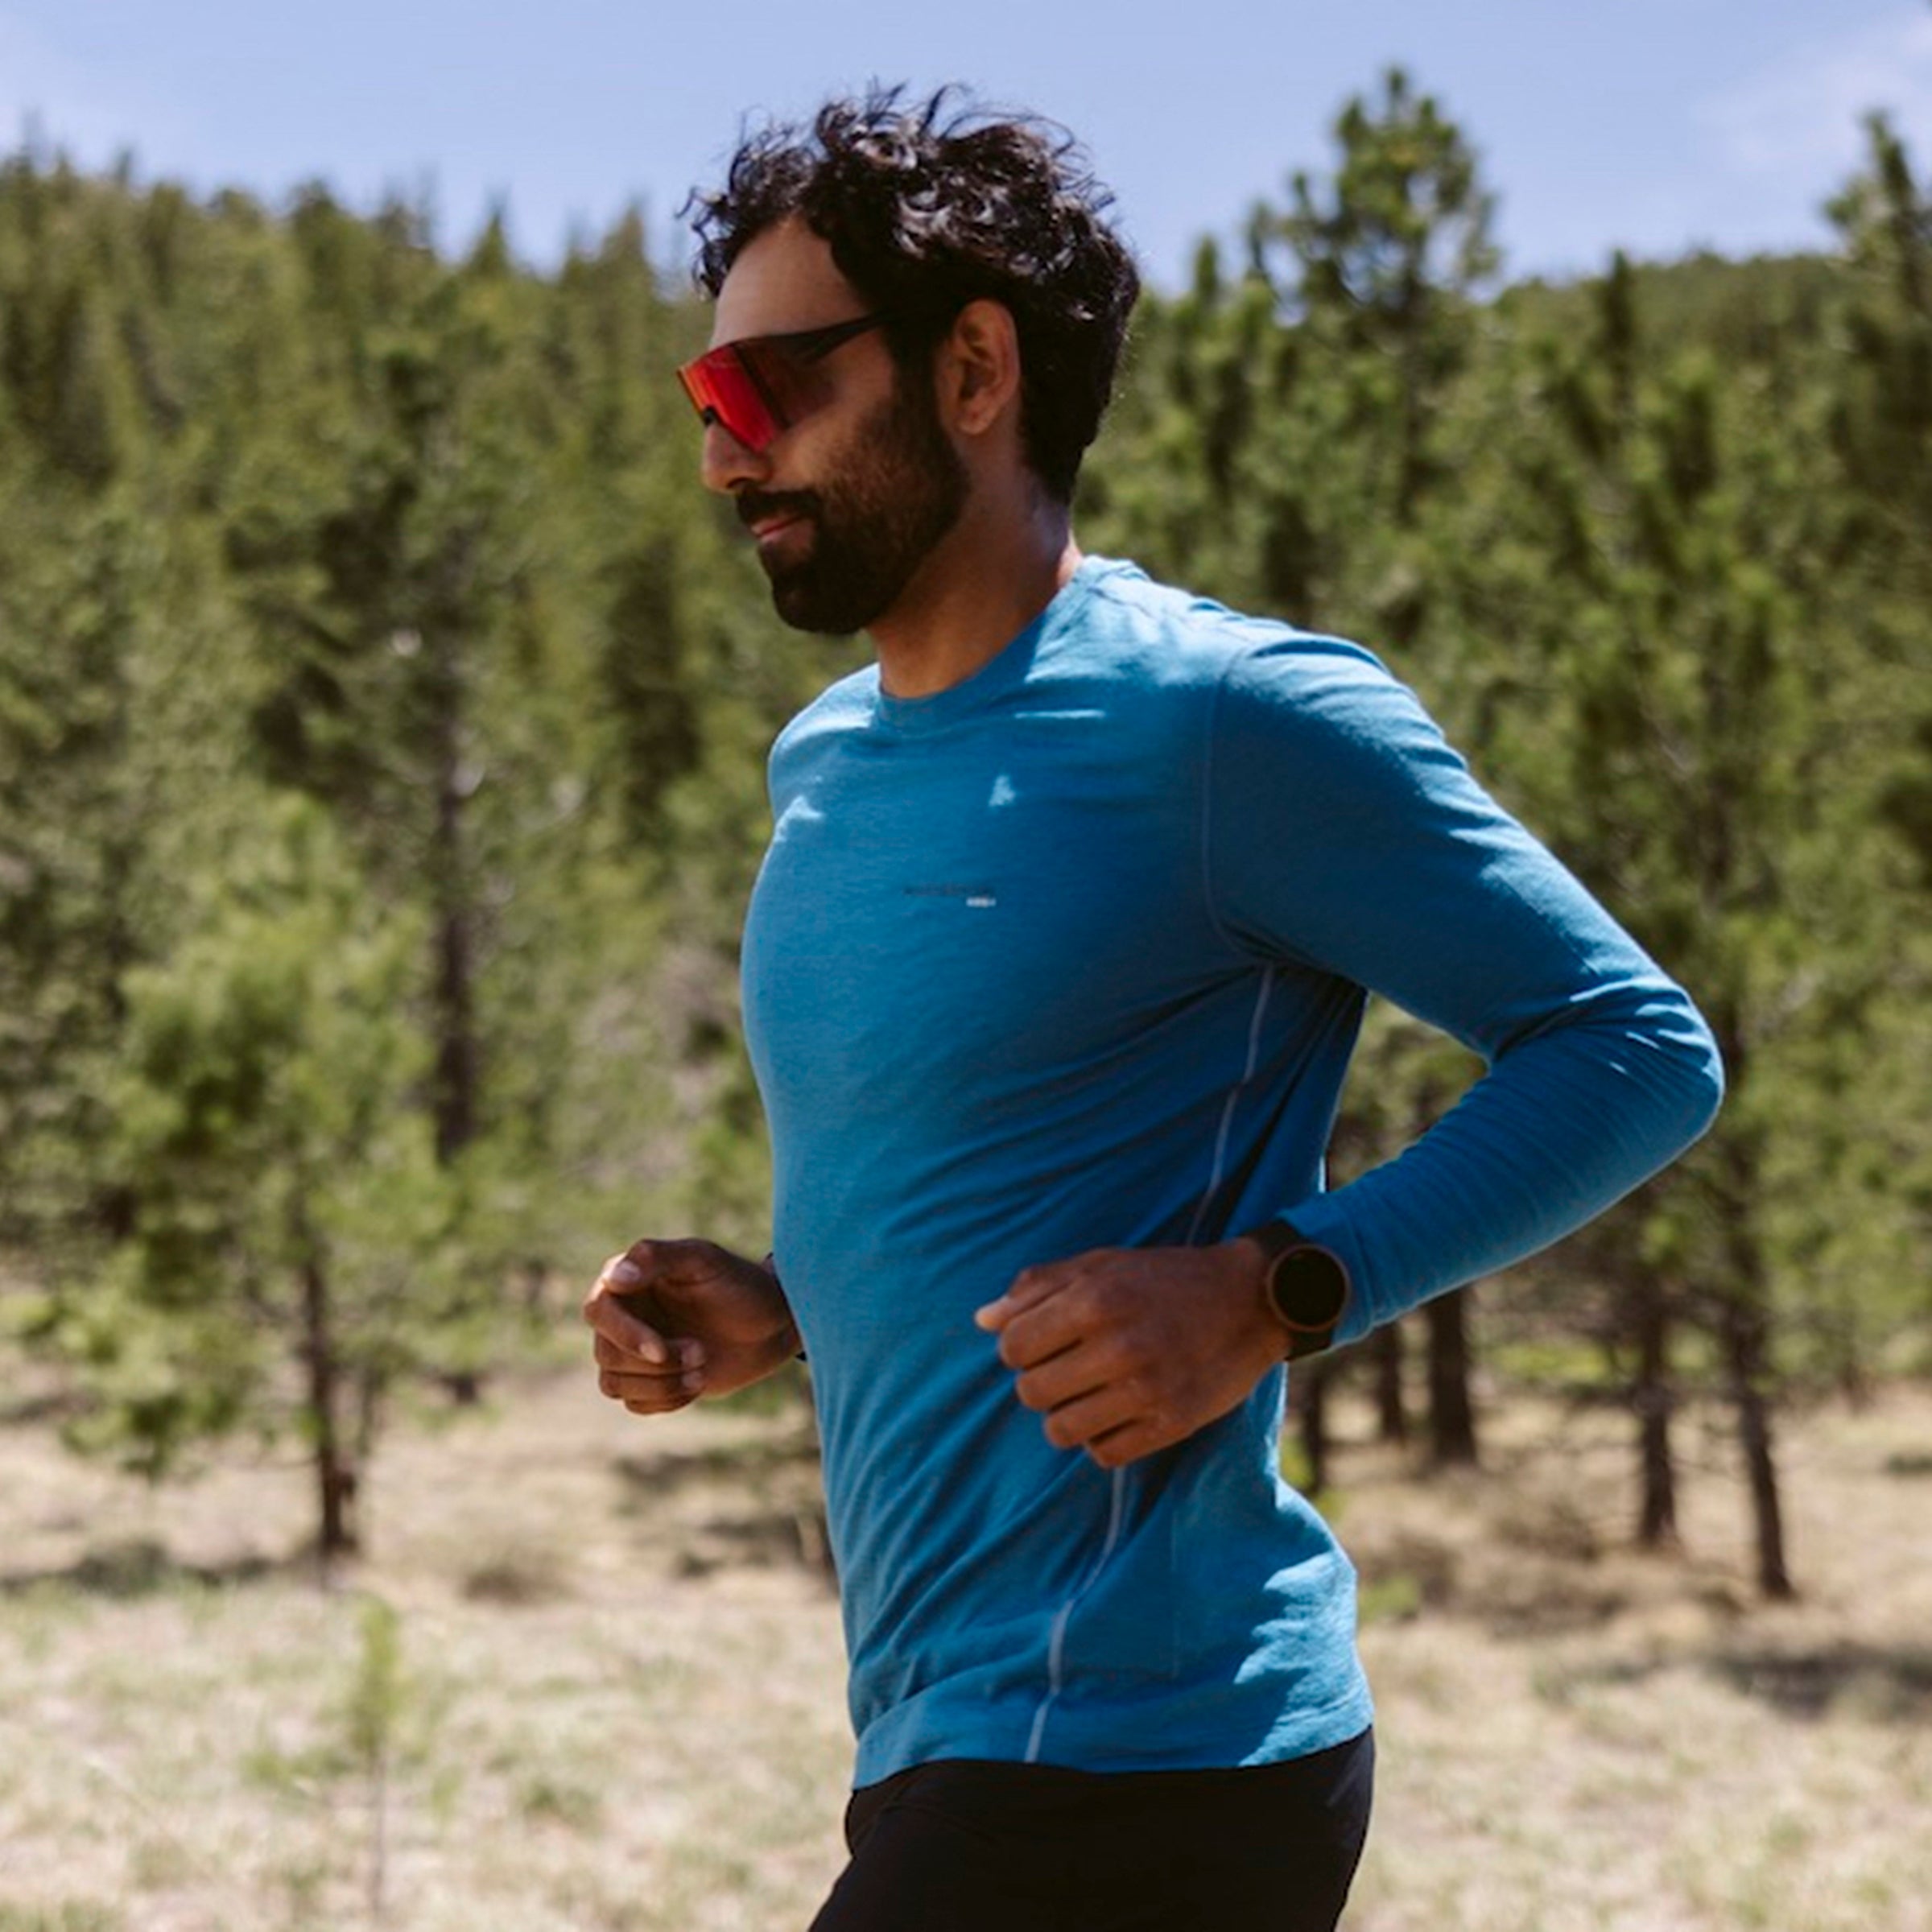 Smartwool review: Smartwool makes some of the best running apparel I've  tested - Reviewed